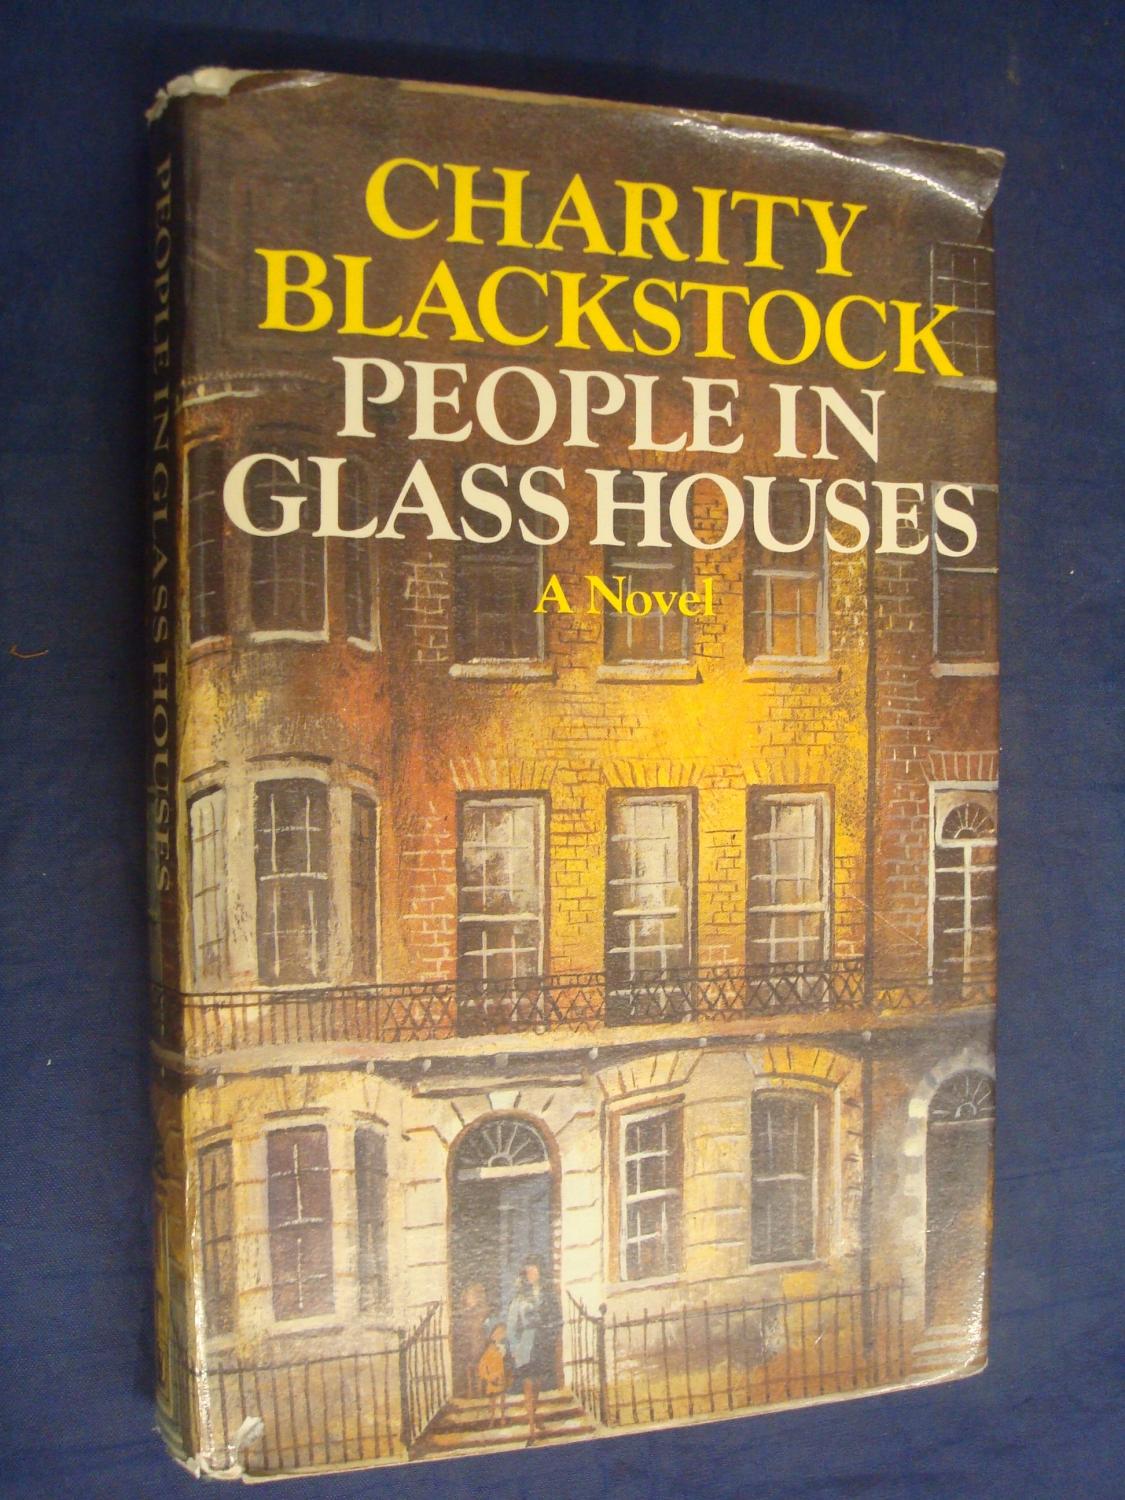 People in Glass Houses - Blackstock, Charity